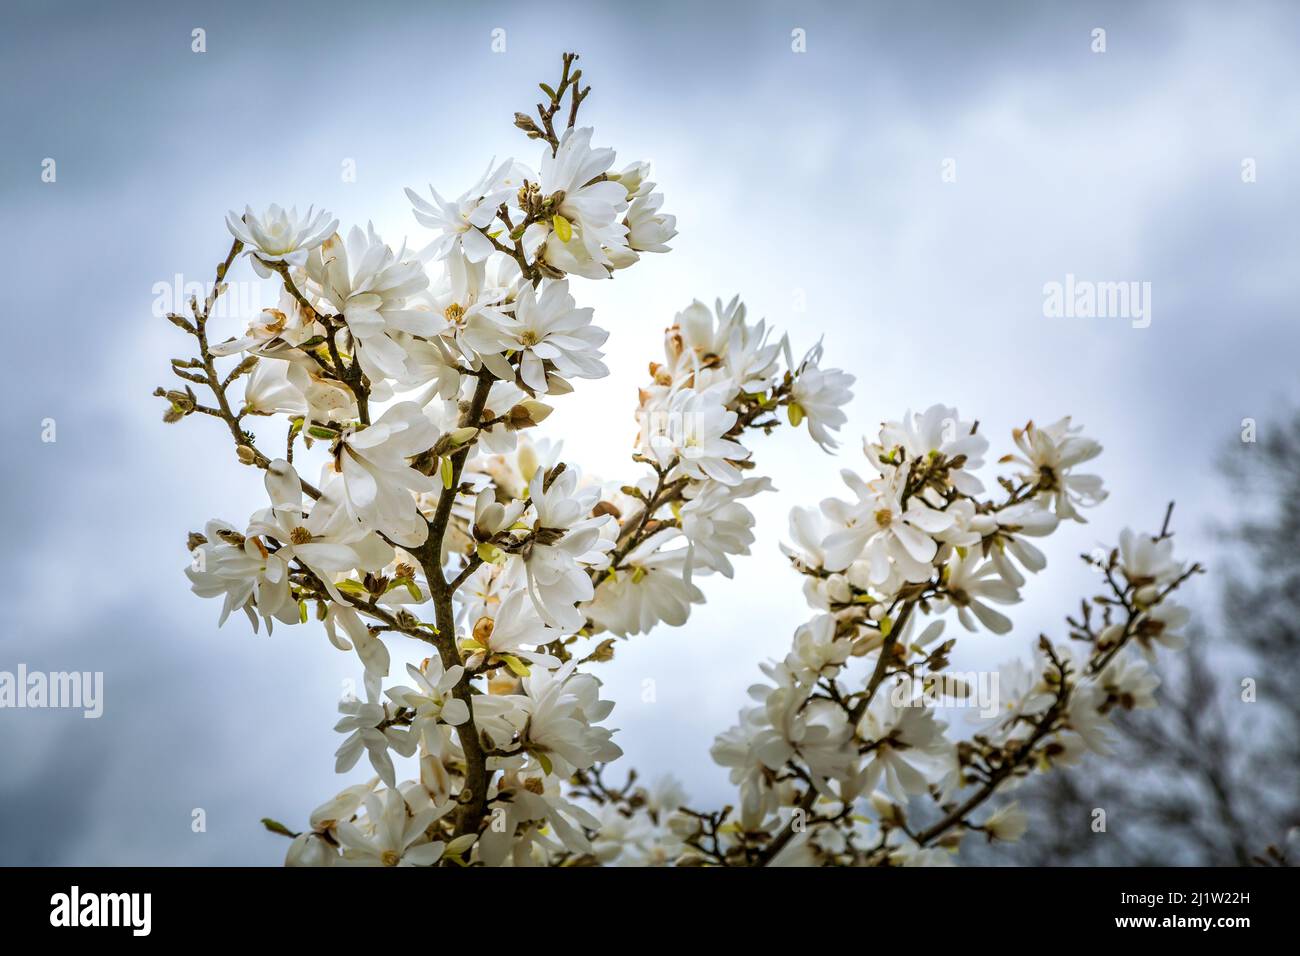 White flowers of Magnolia loebneri against blue cloudy sky Stock Photo